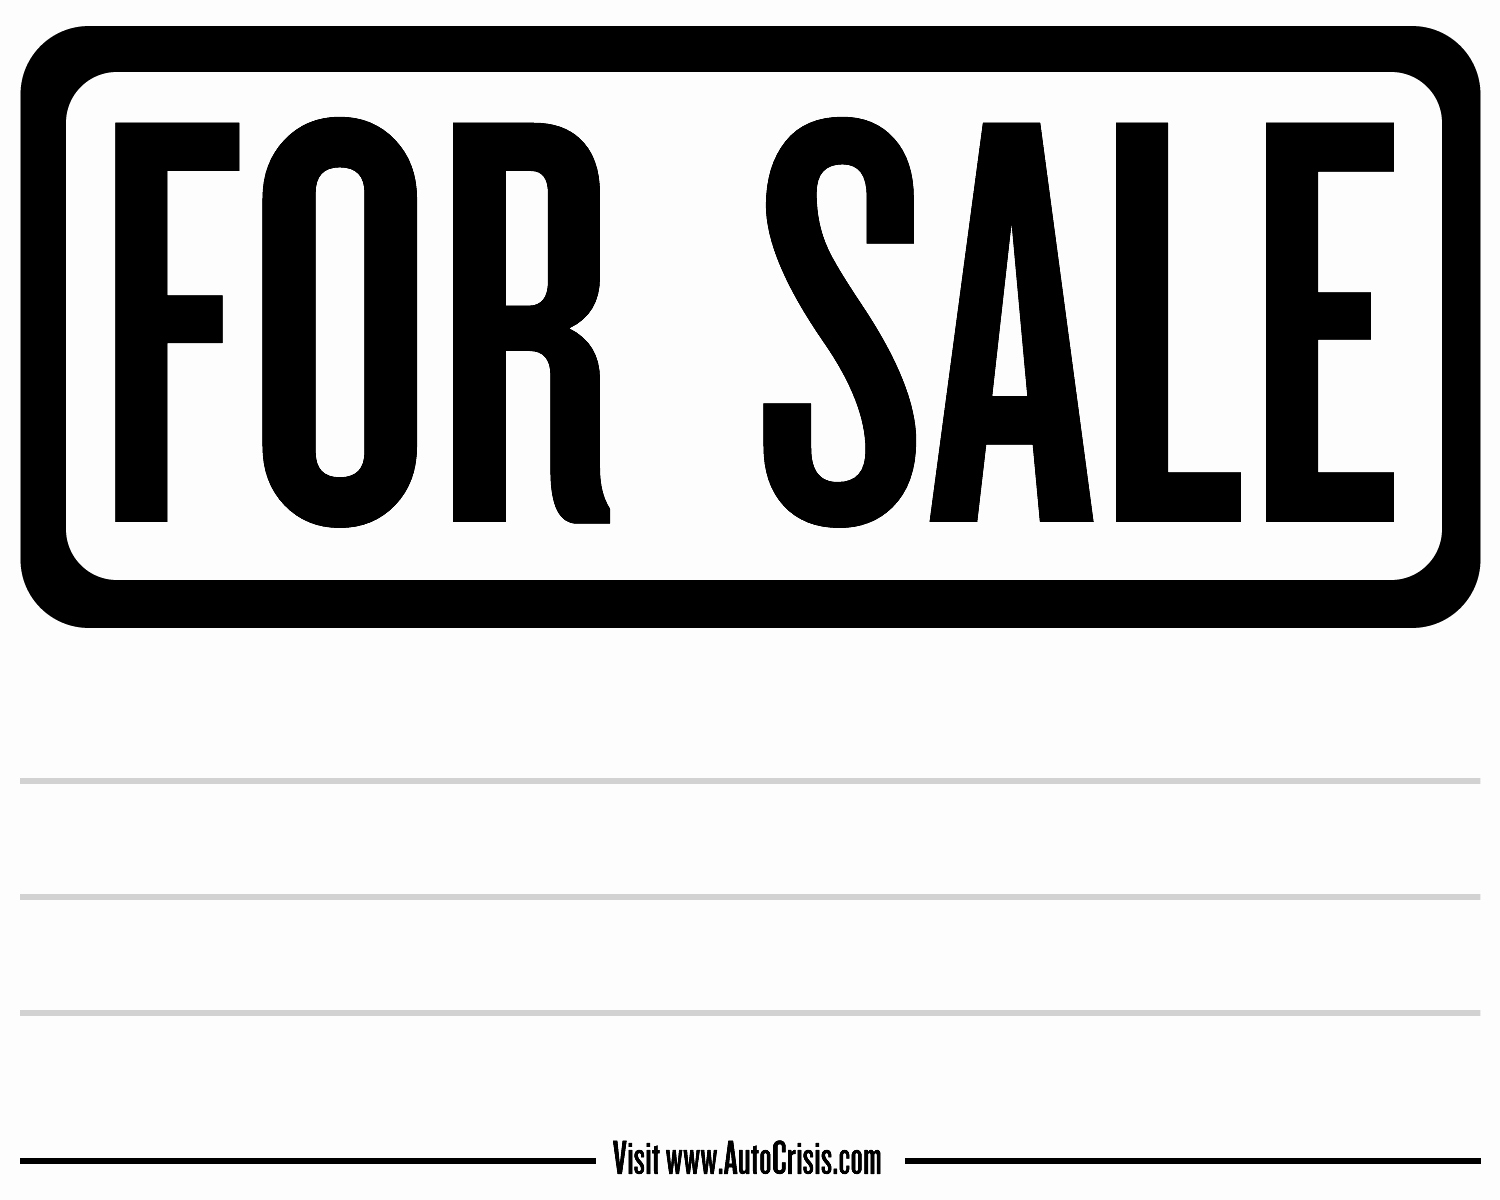 Car for Sale Template Free New This Car for Sale Sign Template Printable Images Copyright are the Property Of the Respective